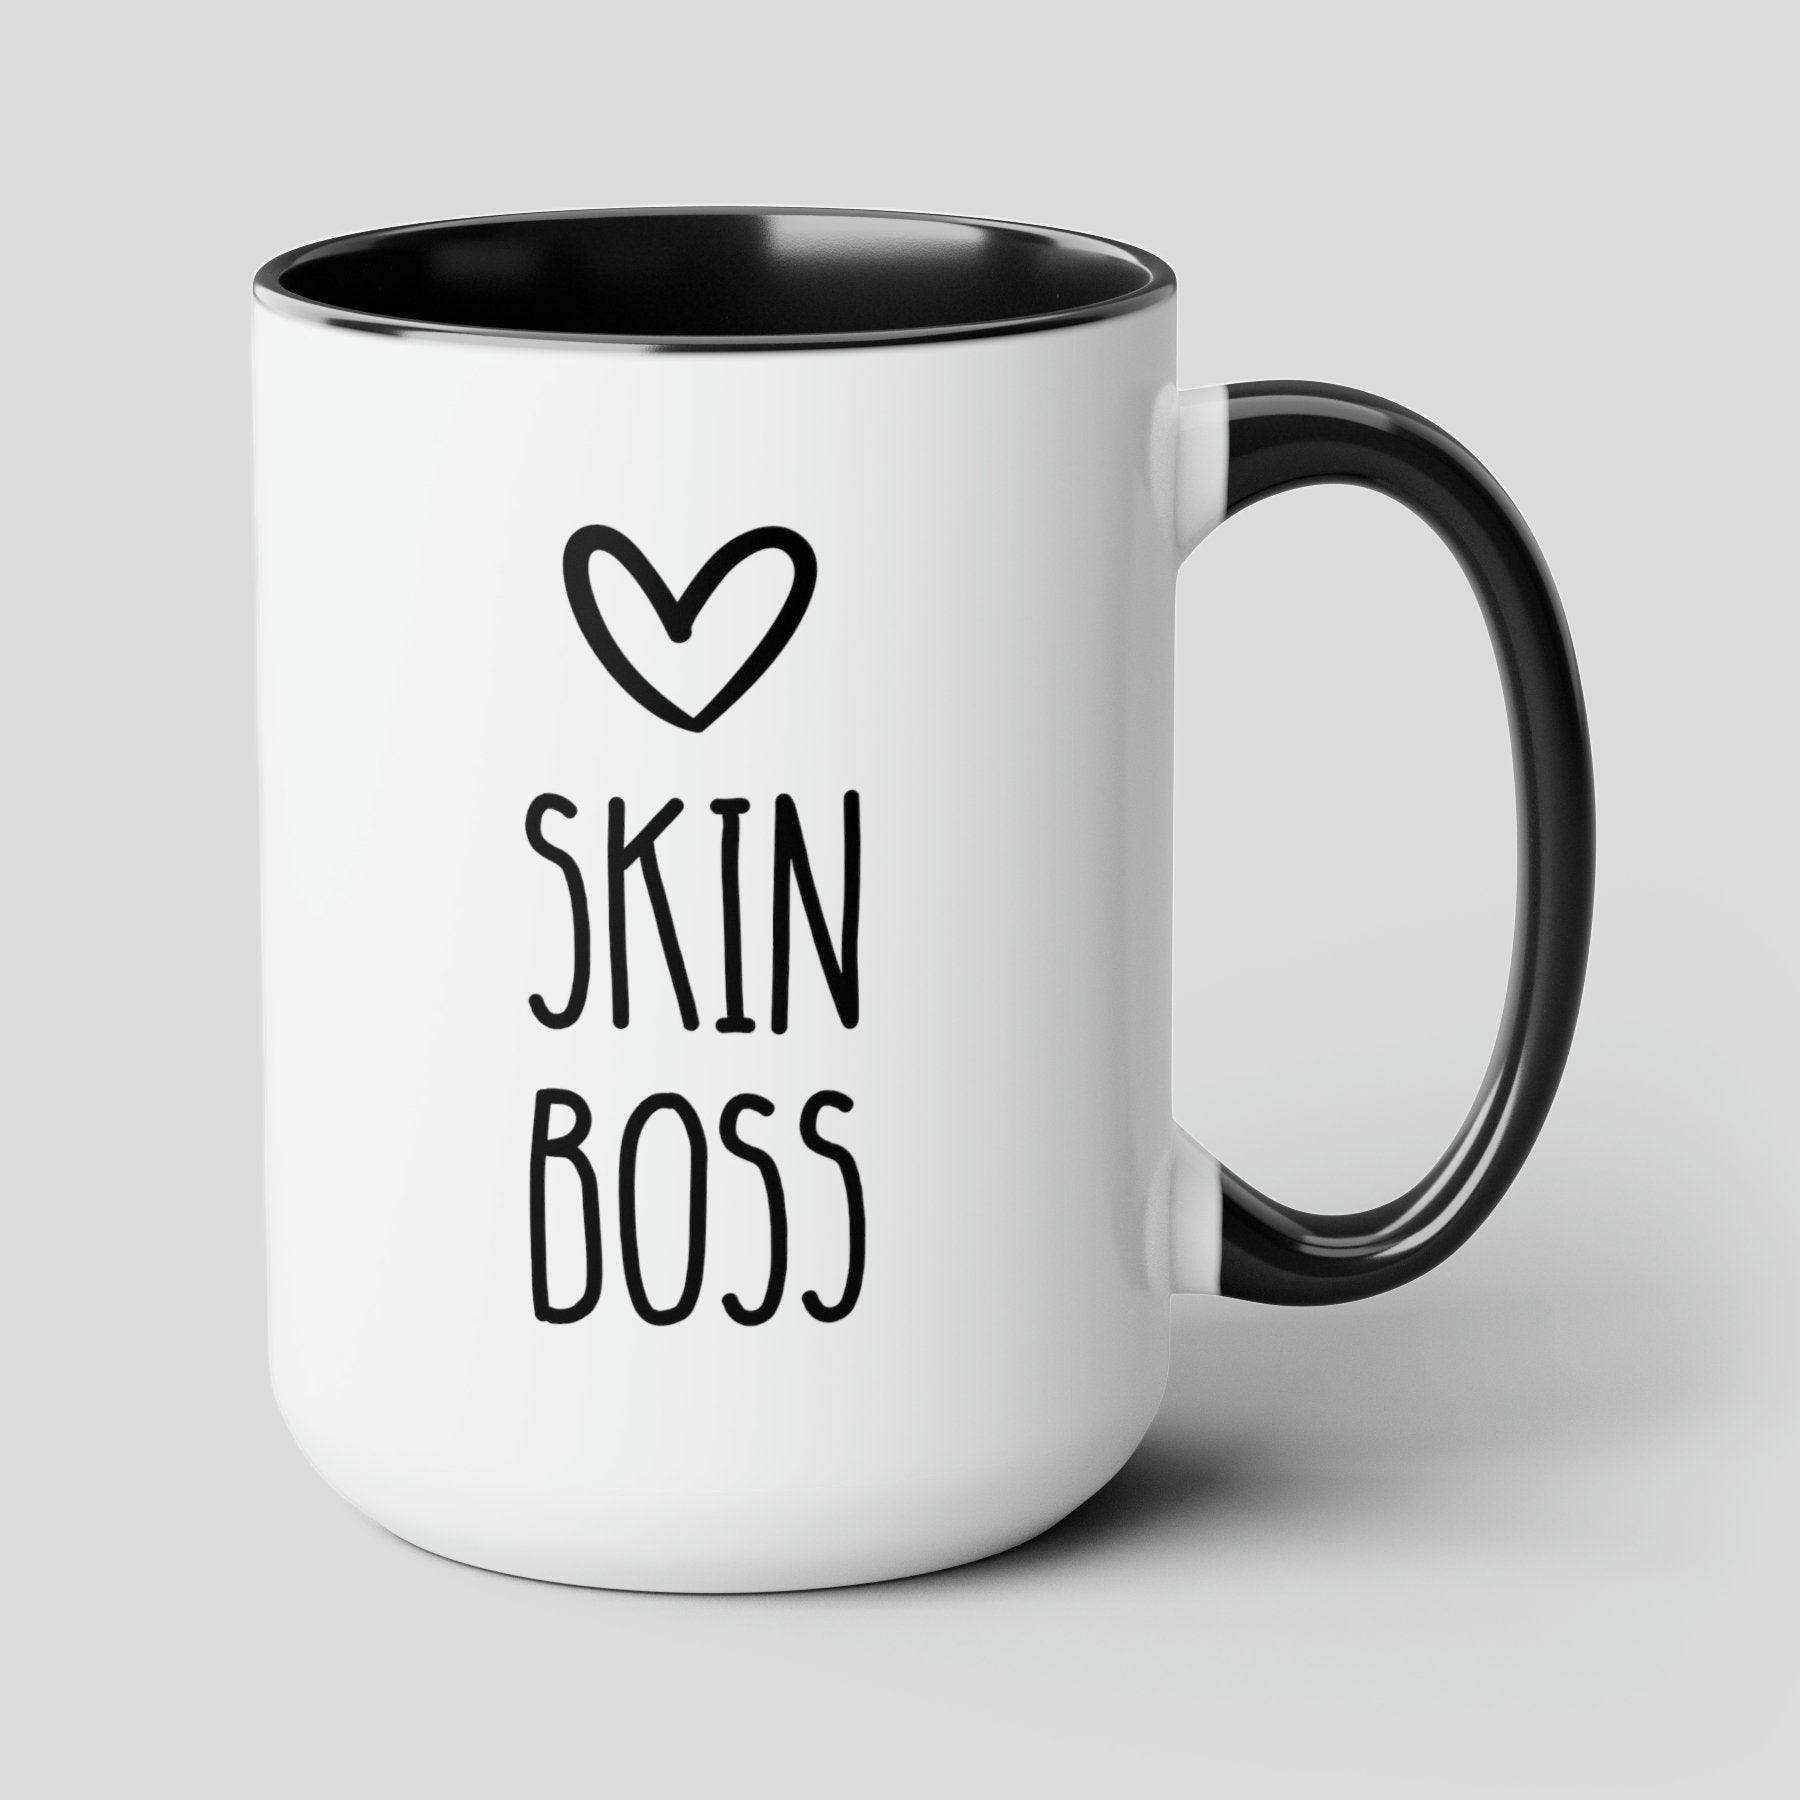 skin boss 15oz white with black accent funny coffee mug tea cup gift for dermatologist beautician aesthetician waveywares wavey wares